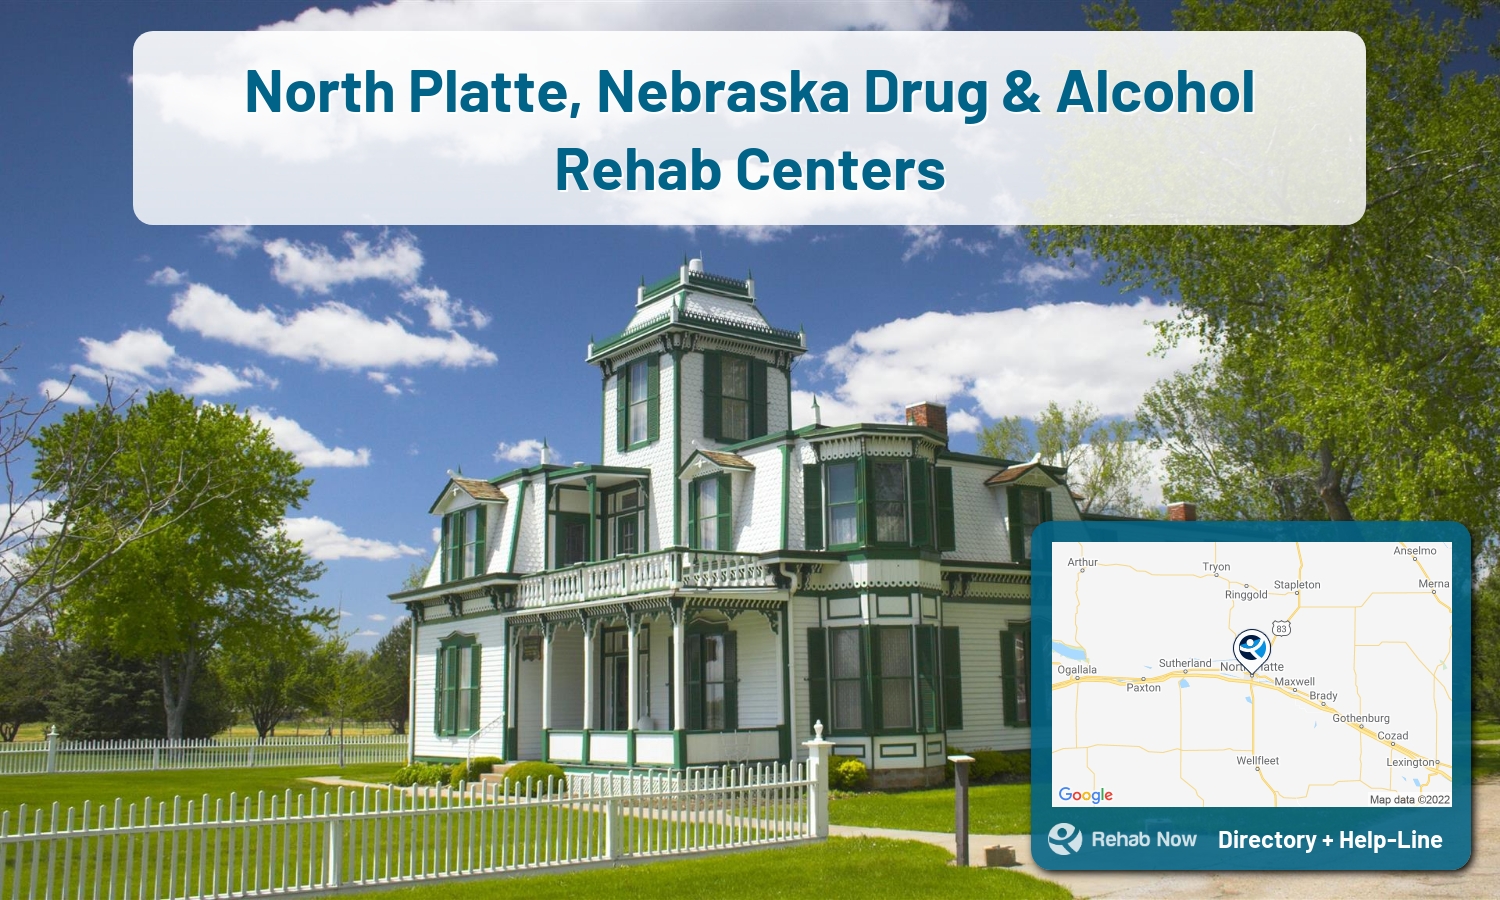 Our experts can help you find treatment now in North Platte, Nebraska. We list drug rehab and alcohol centers in Nebraska.